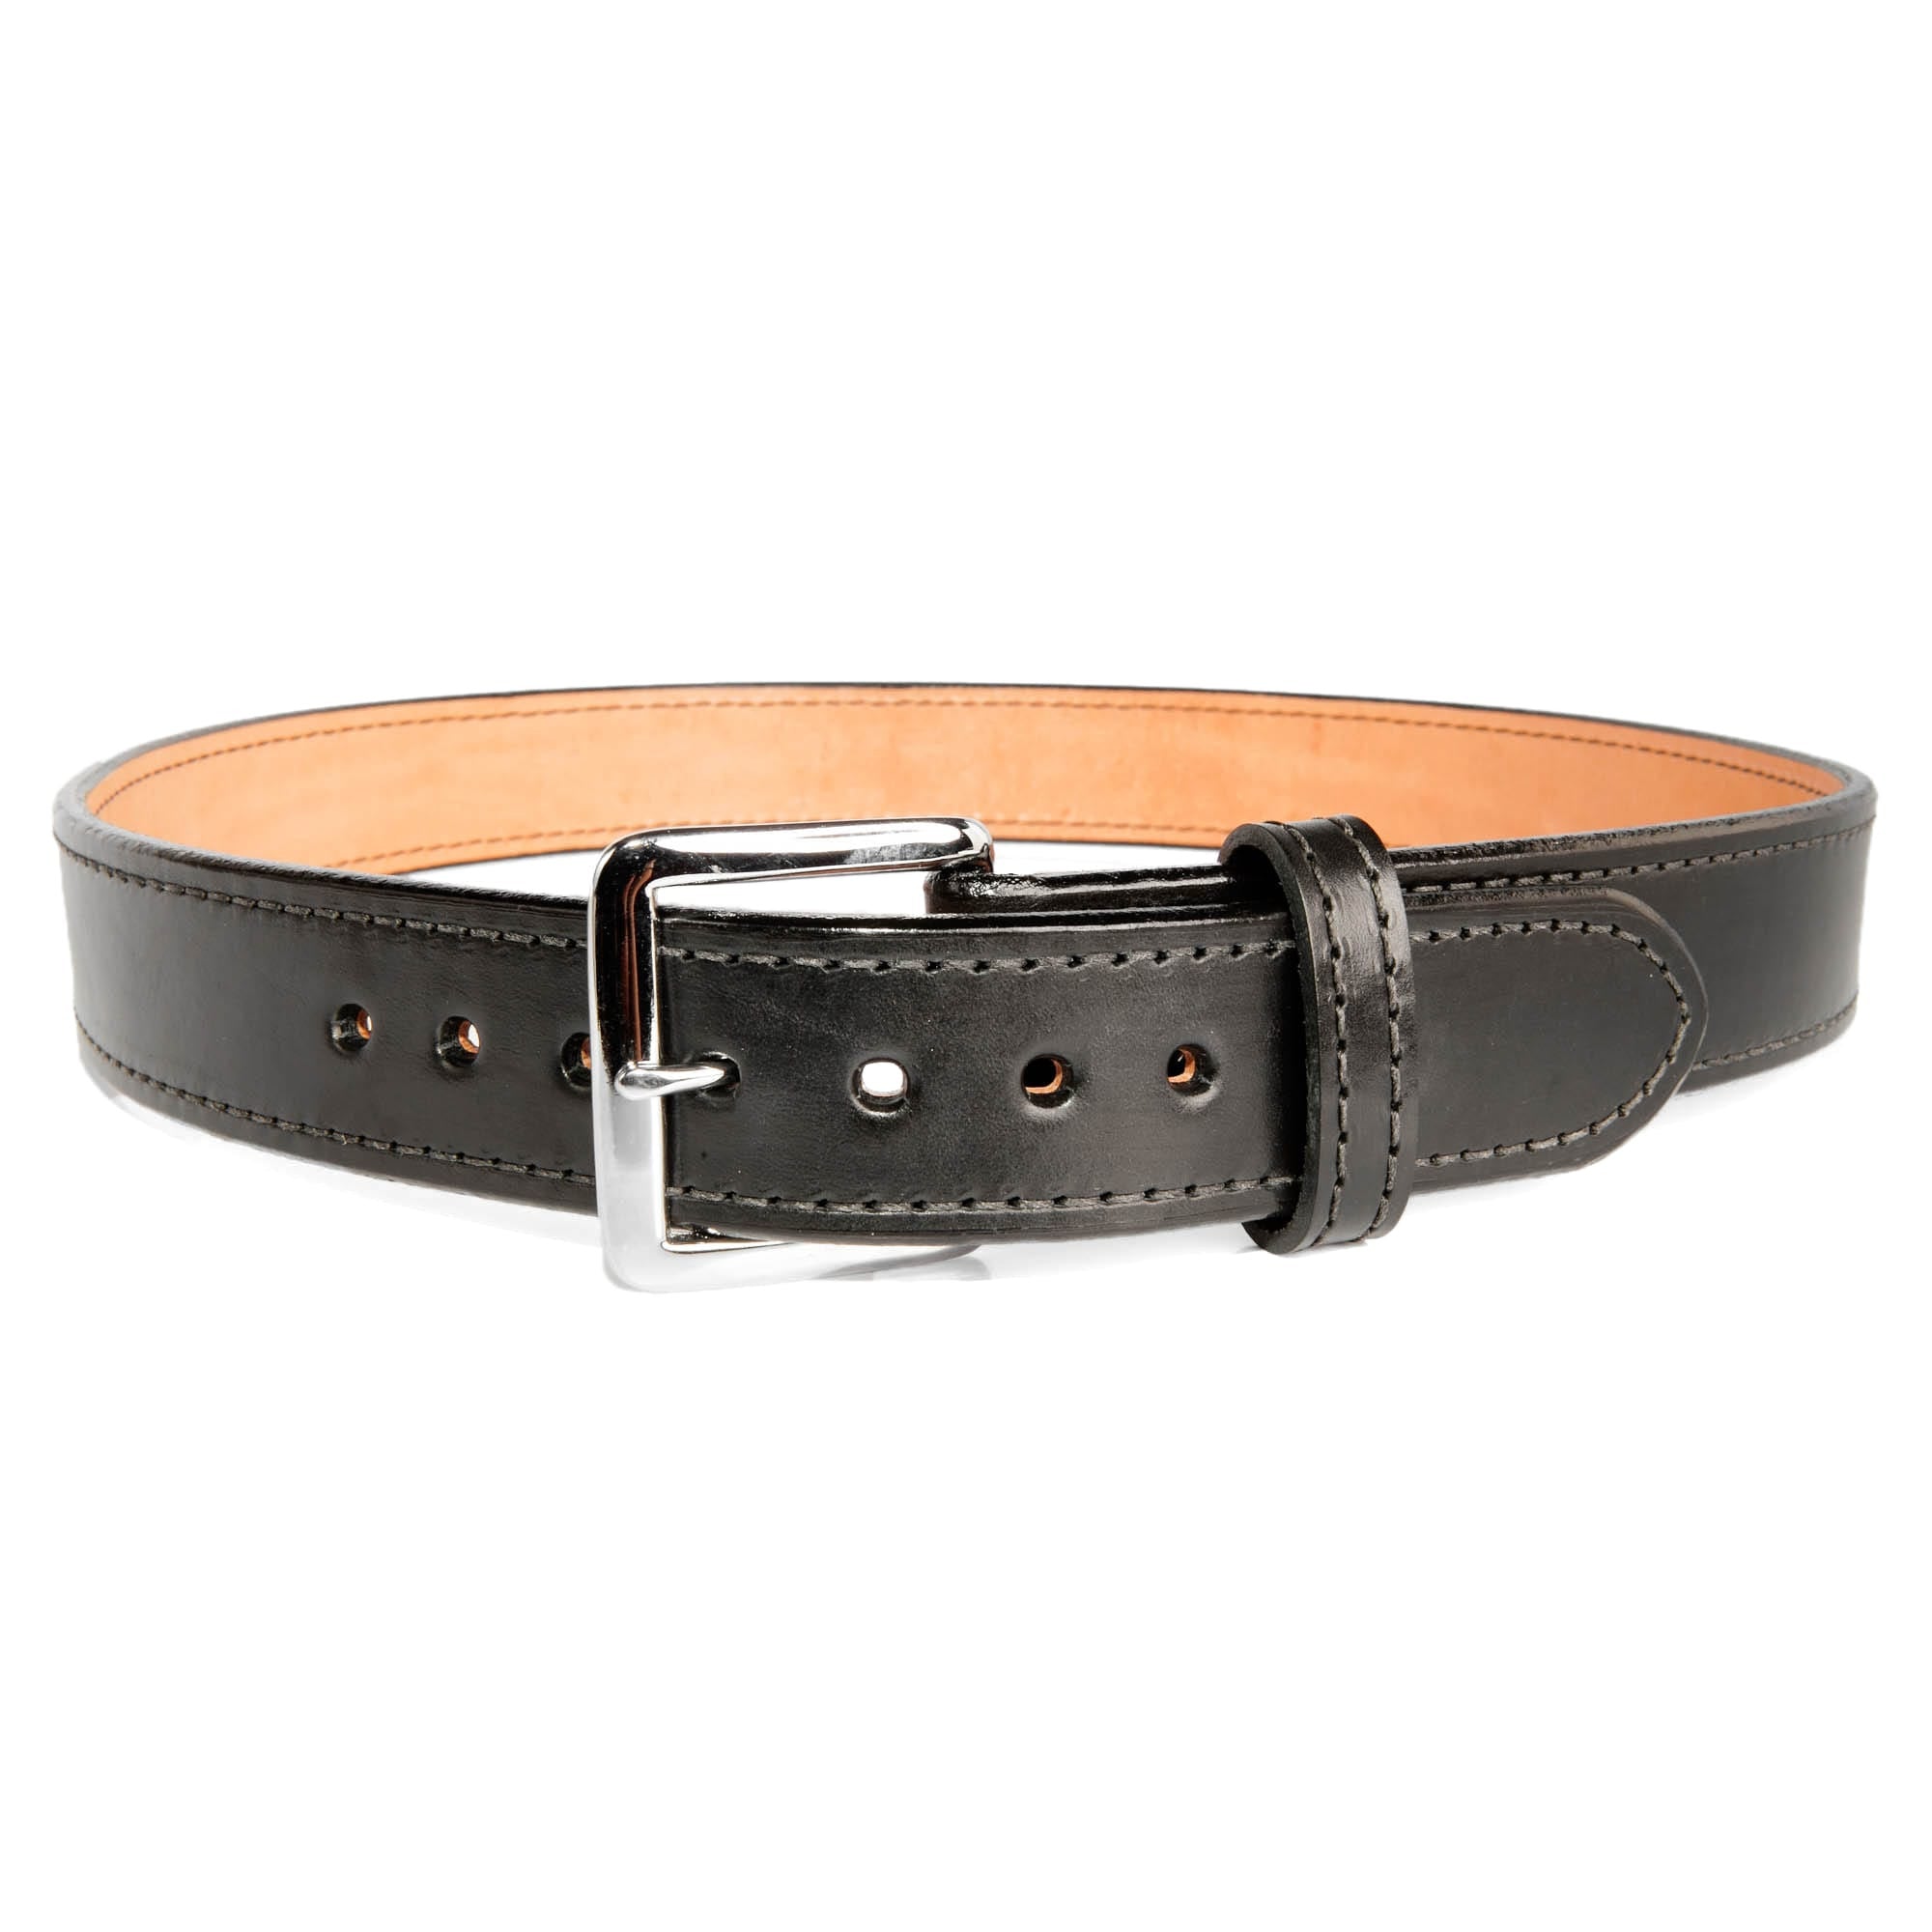 Handmade Leather Belt in Red 32 Mm 1.25 or 40 Mm 